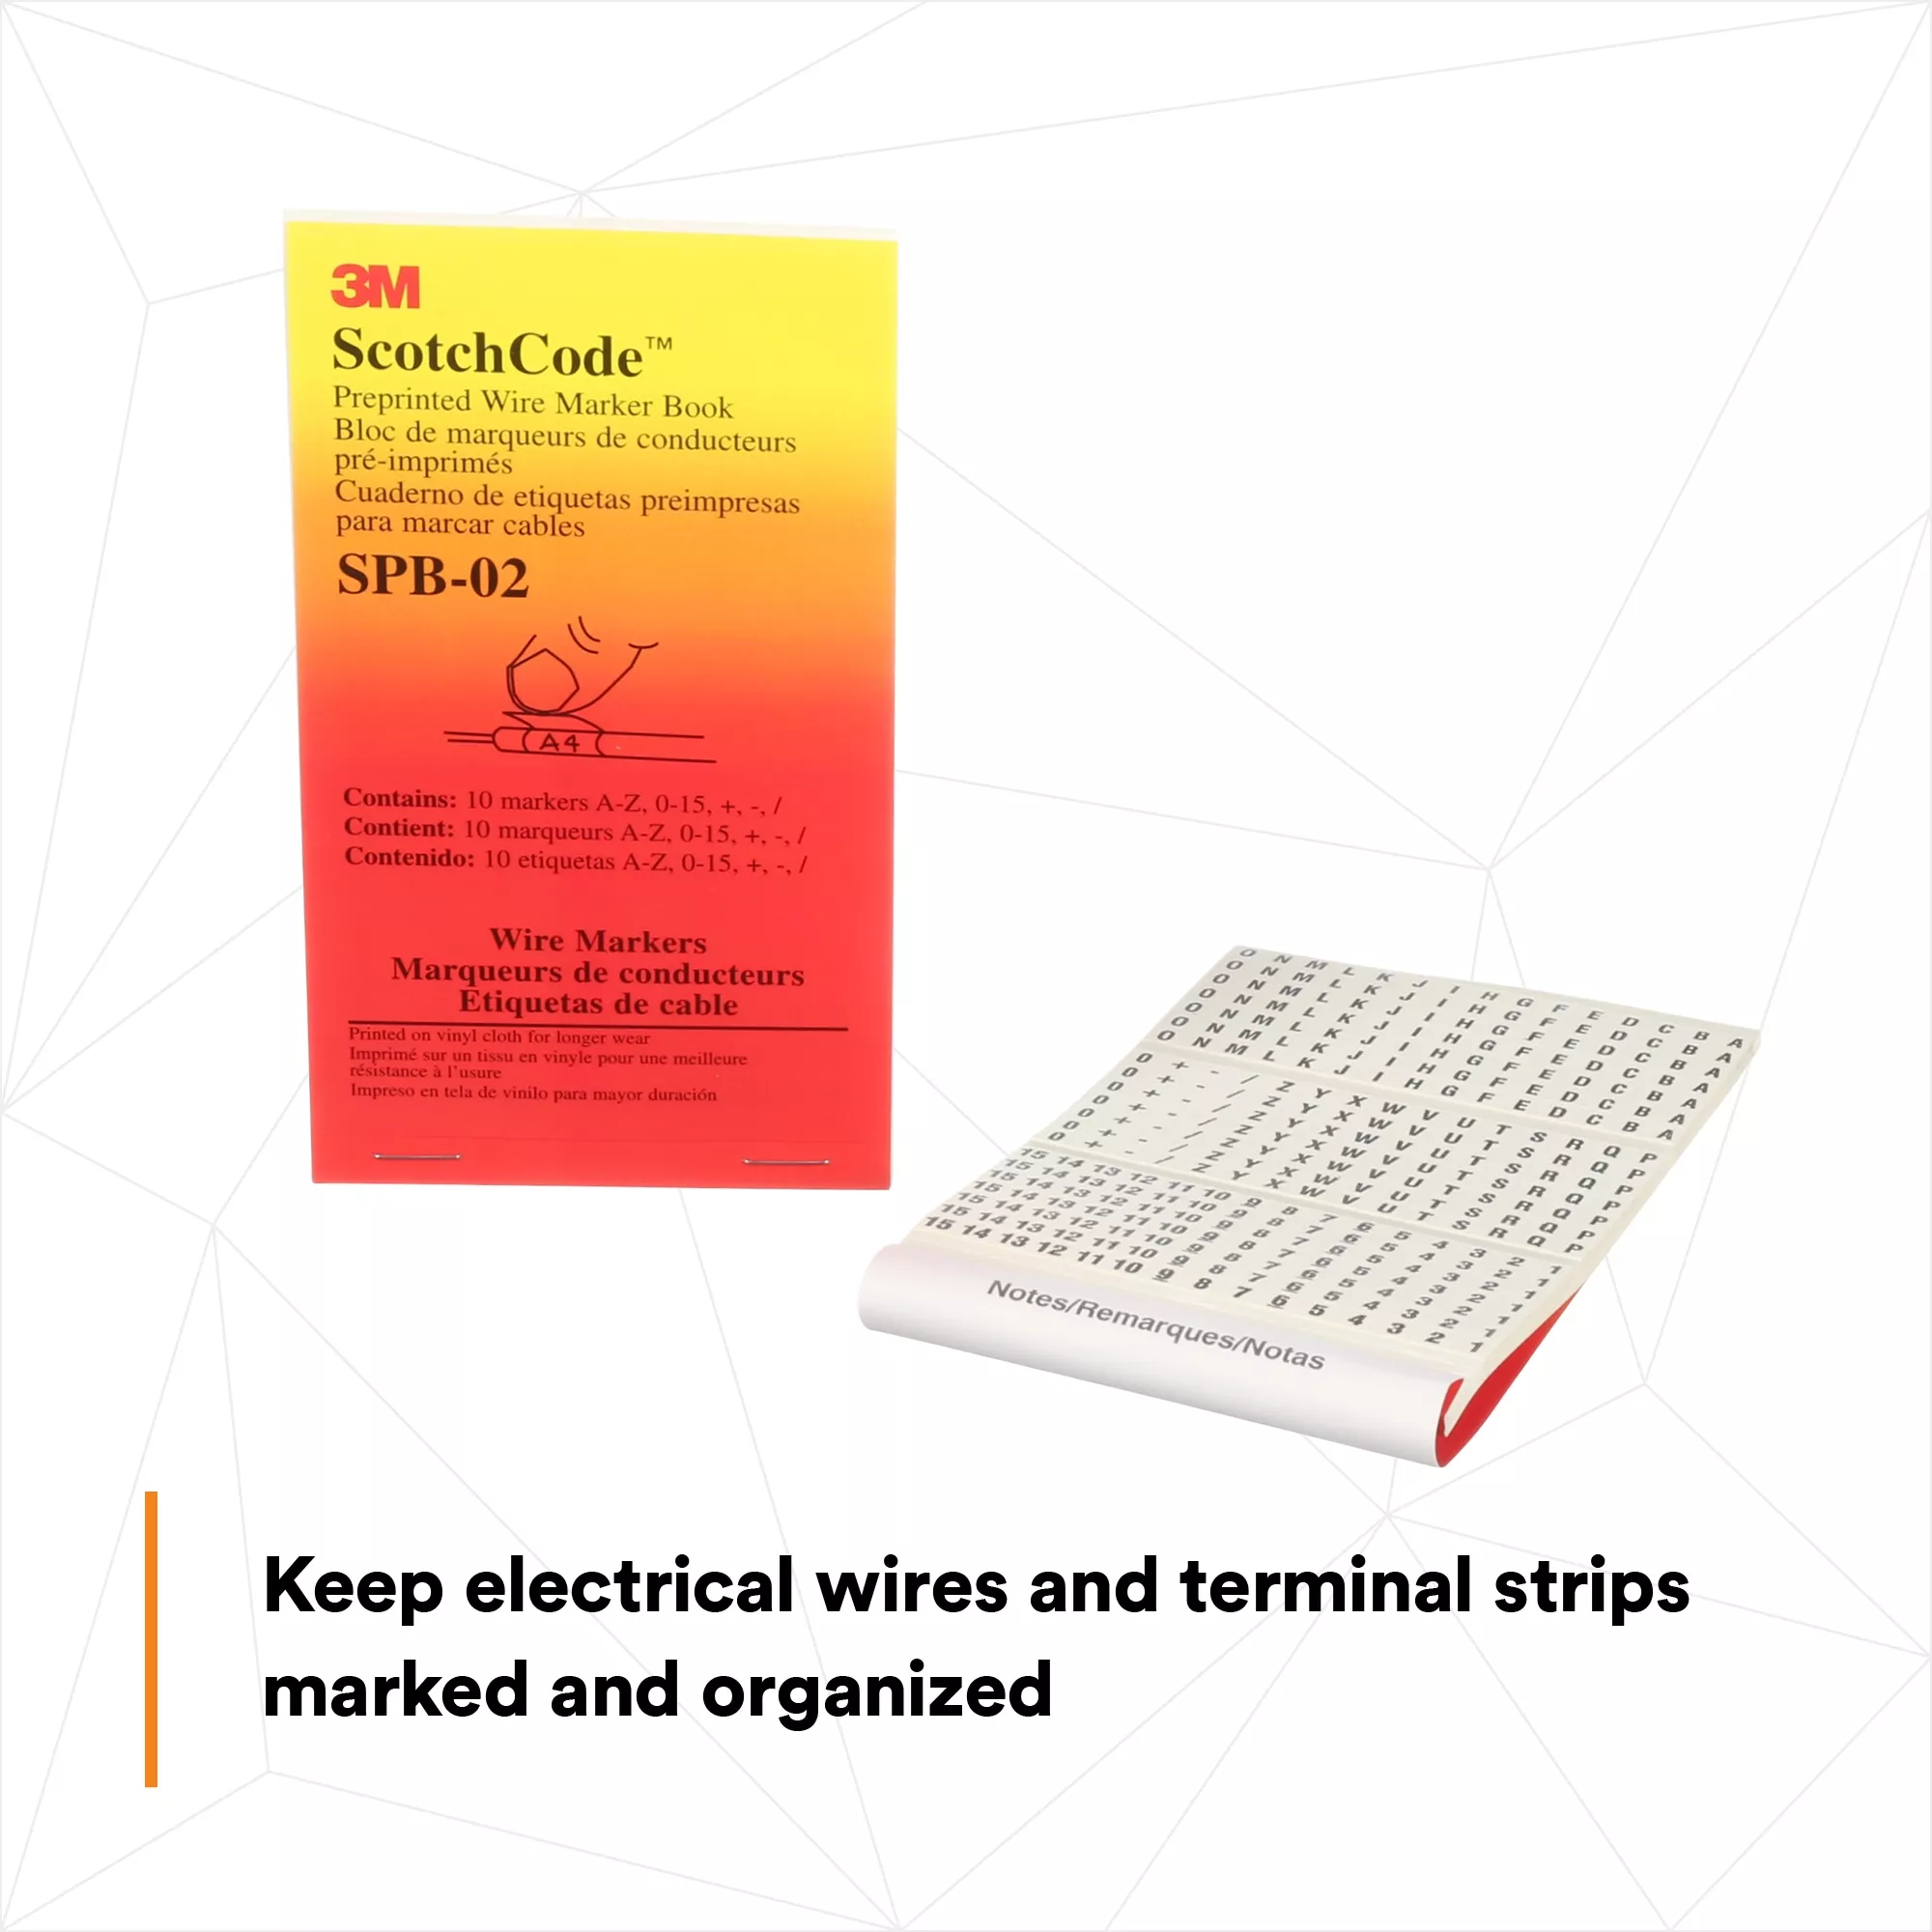 Product Number SPB-02 | 3M™ ScotchCode™ Pre-Printed Wire Marker Book SPB-02